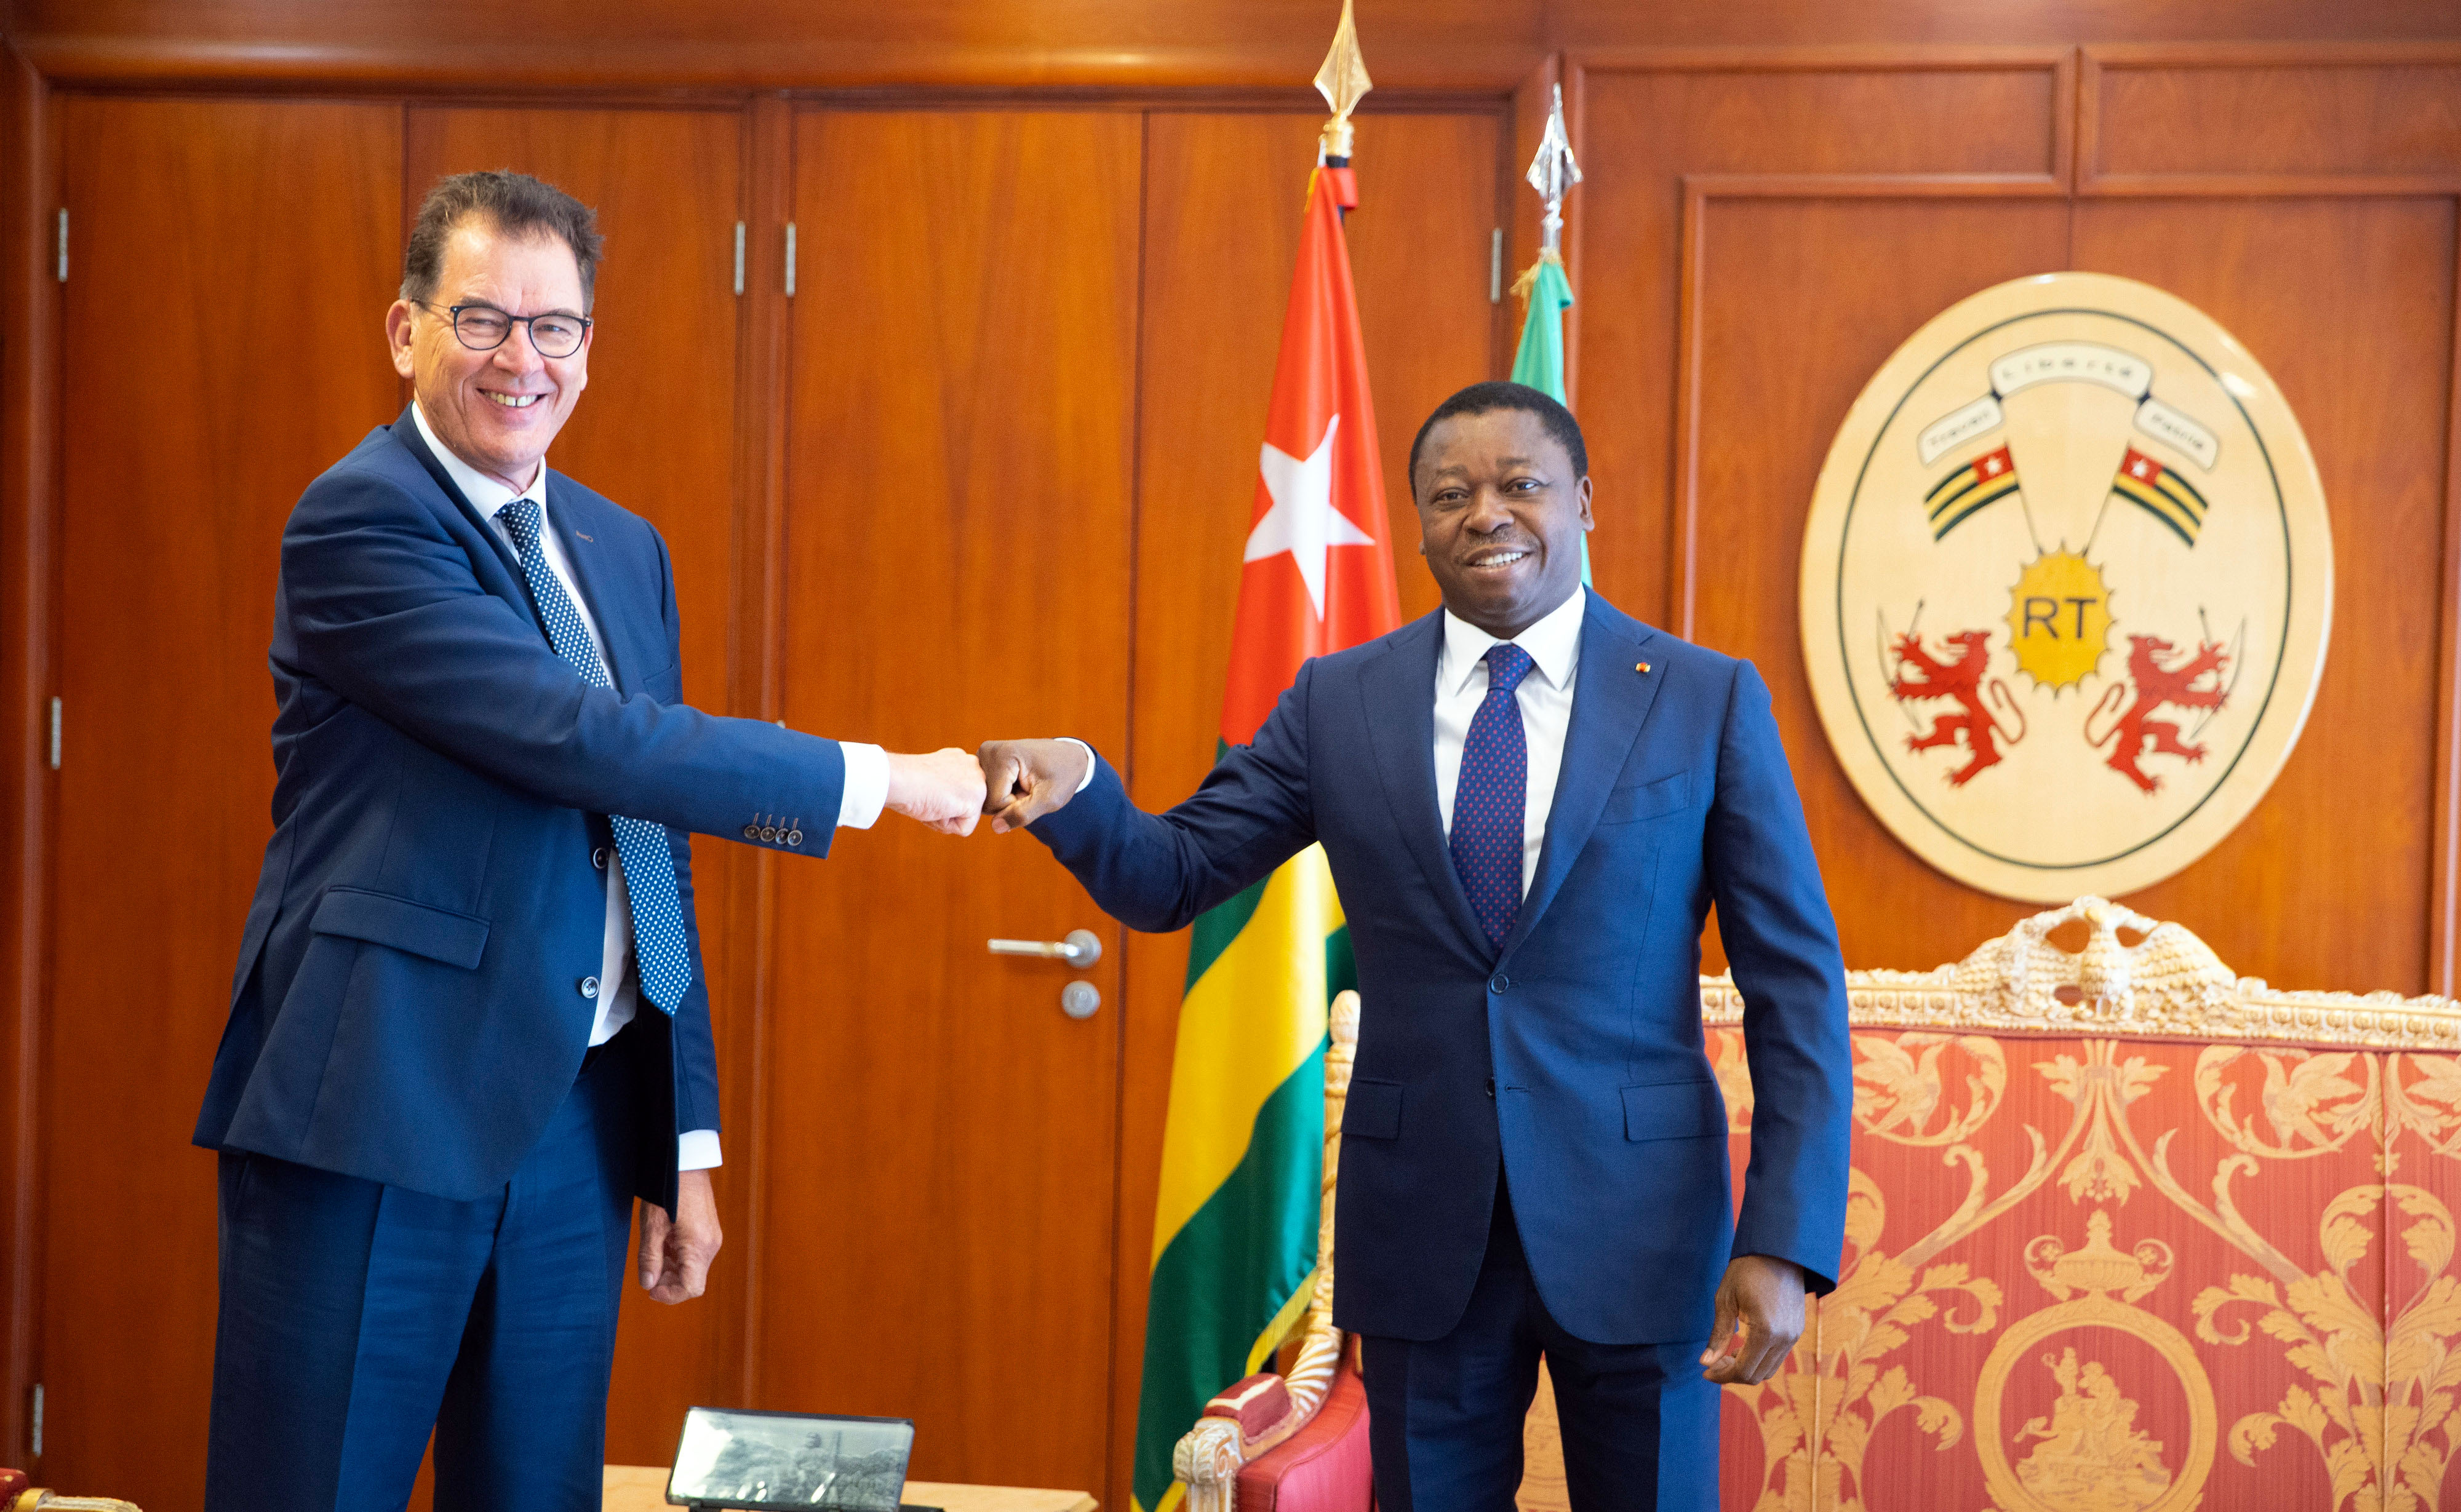 The then Federal Minister Gerd Müller met Togolese President Fauré Gnassingbé in Lomé on 14 June 2021.